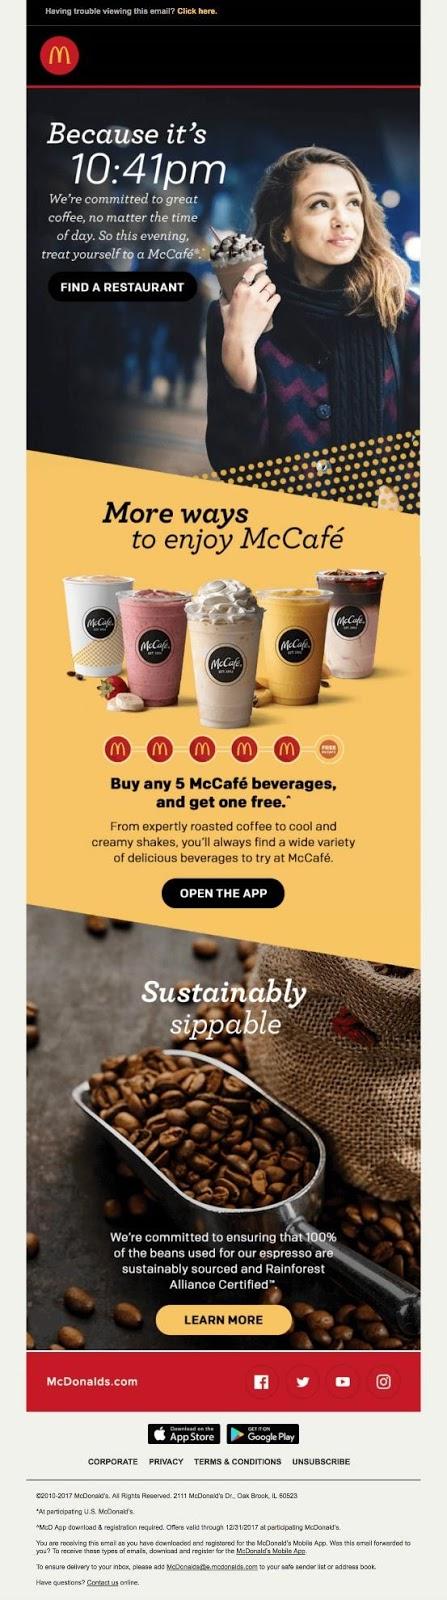 if McDonald's didn’t have the same red and gold color scheme across all their marketing platforms, would you really consider stopping at that roadside stop instead of a notable chain restaurant?